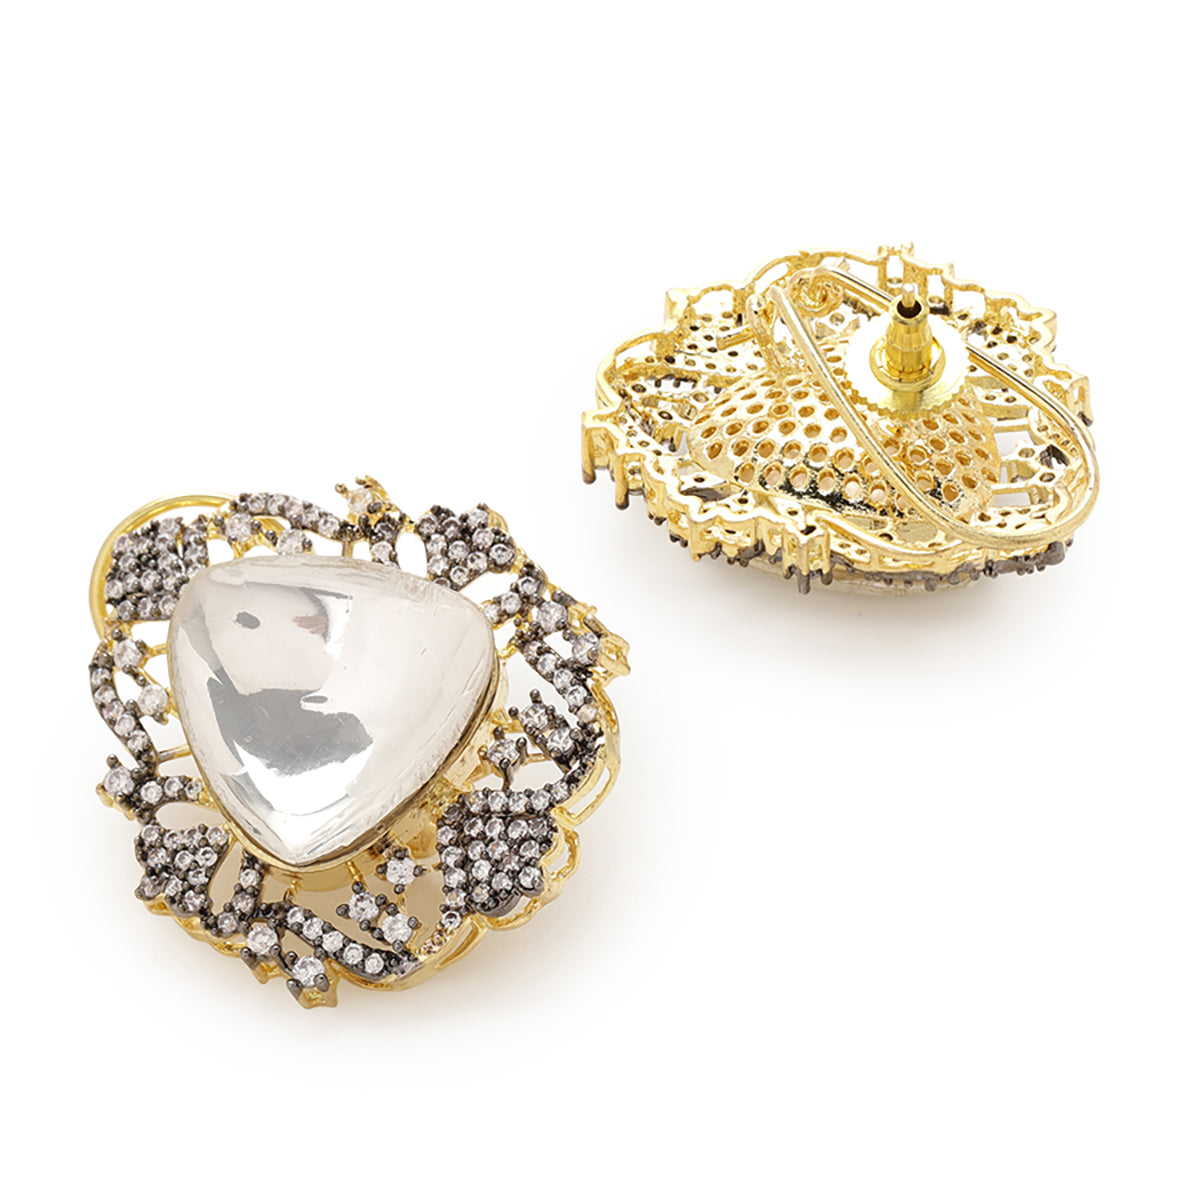 Gold-Toned Contemporary Studs Earrings